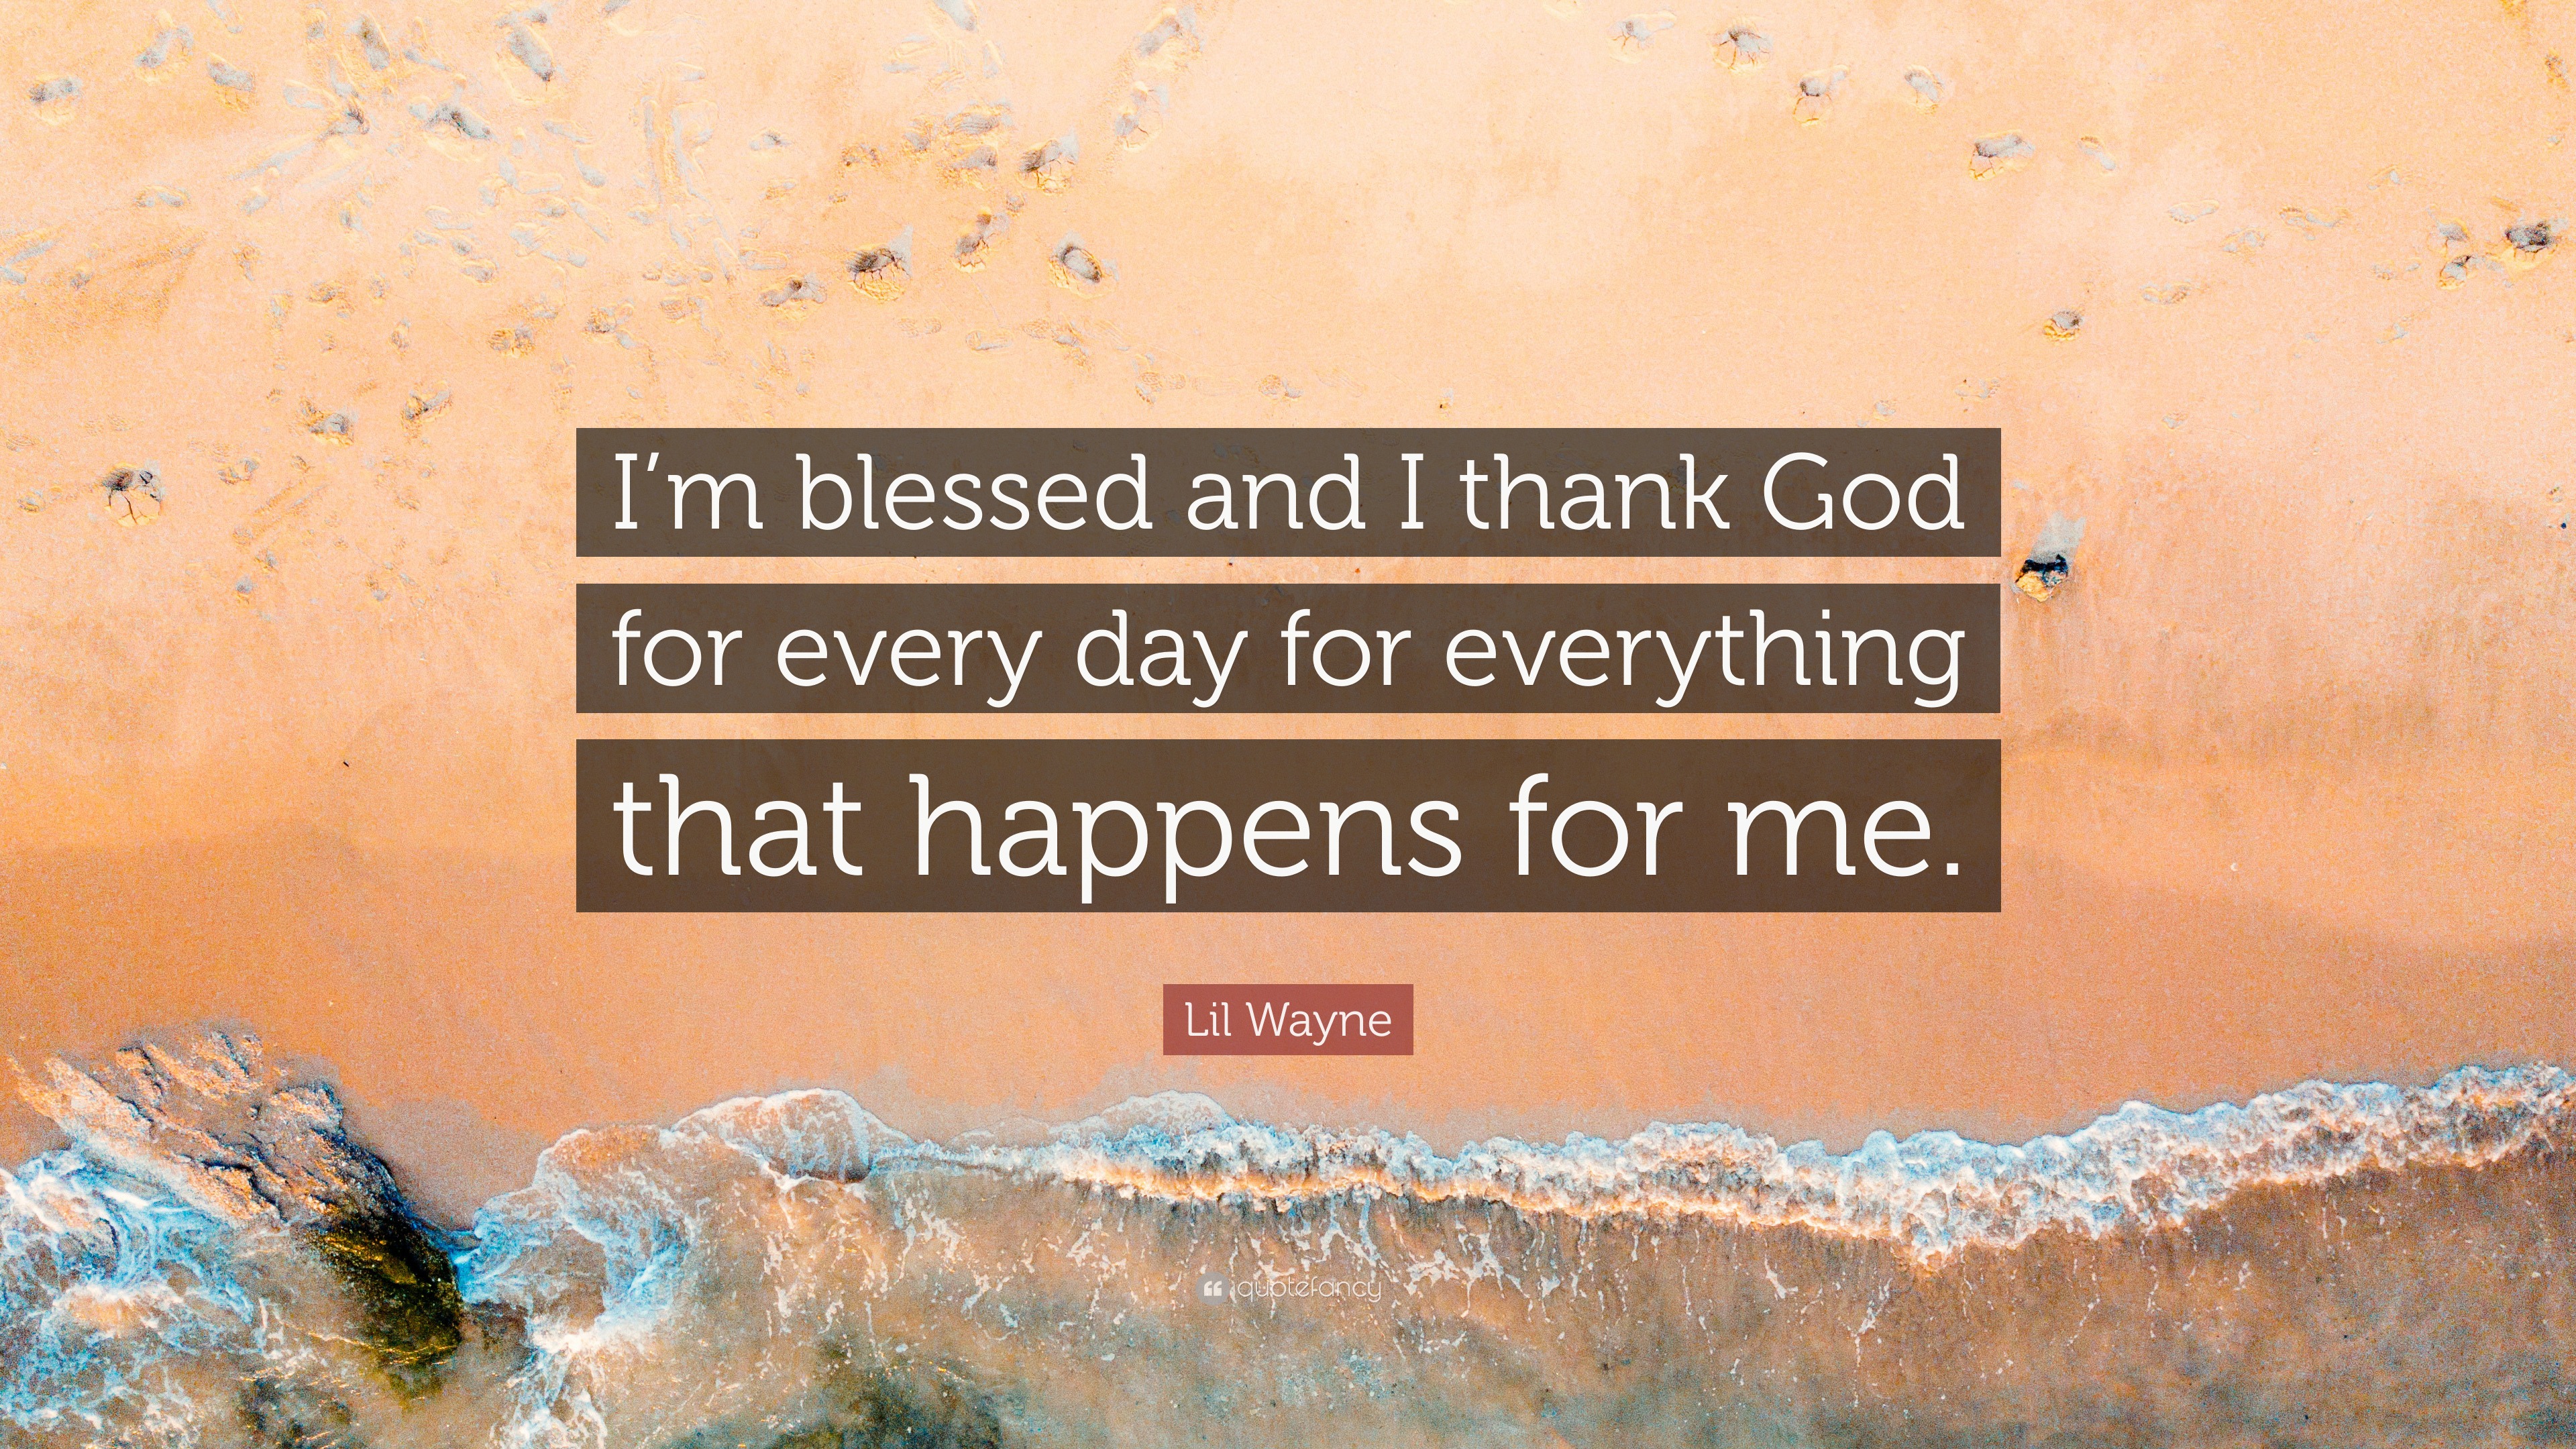 Lil Wayne Quote: “I’m blessed and I thank God for every day for ...